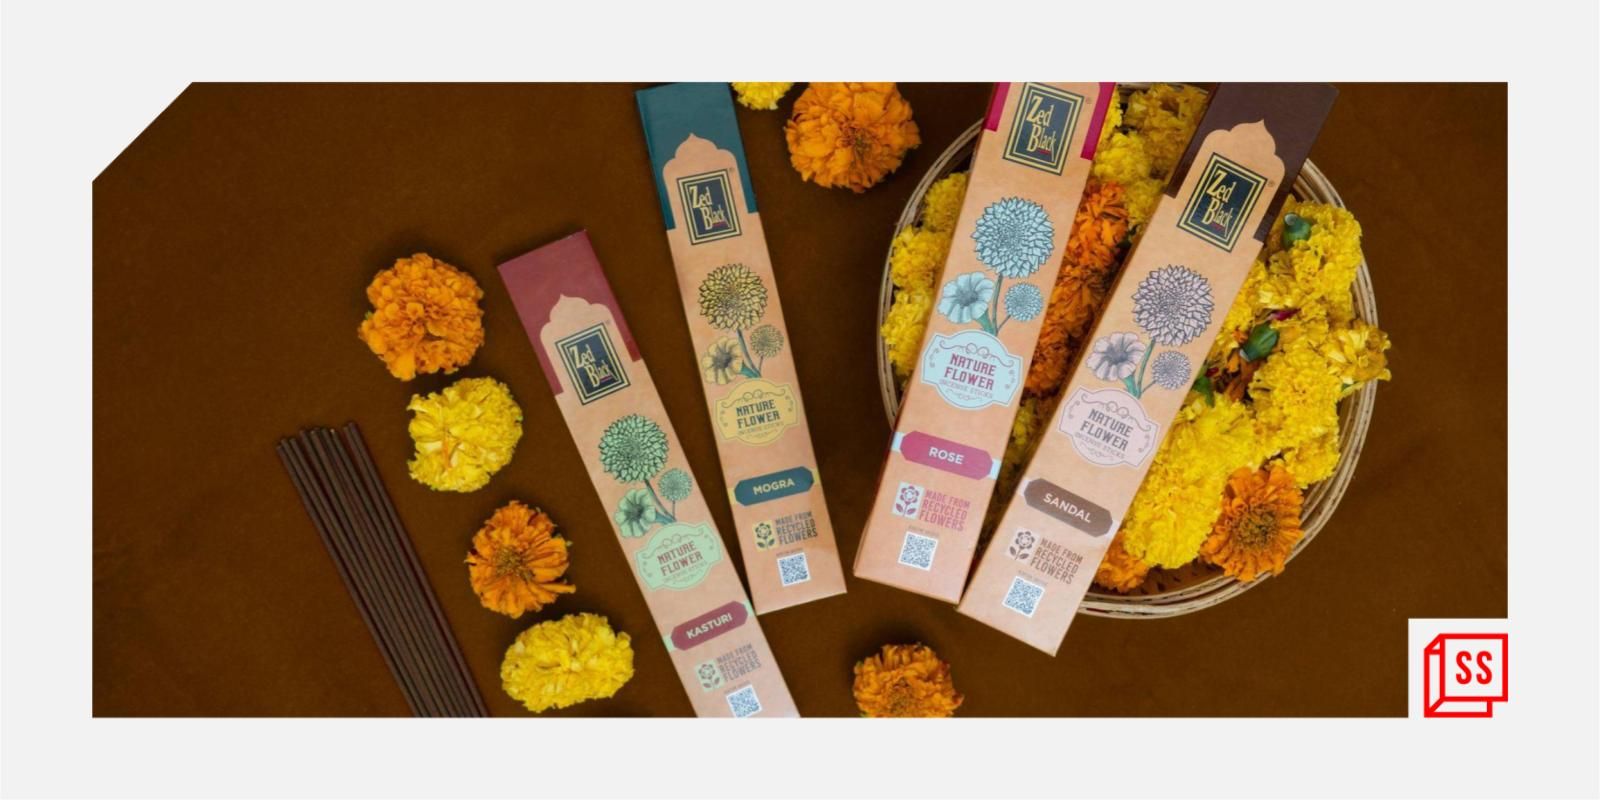 [Sustainable Agenda] This initiative is making incense sticks out of flower waste